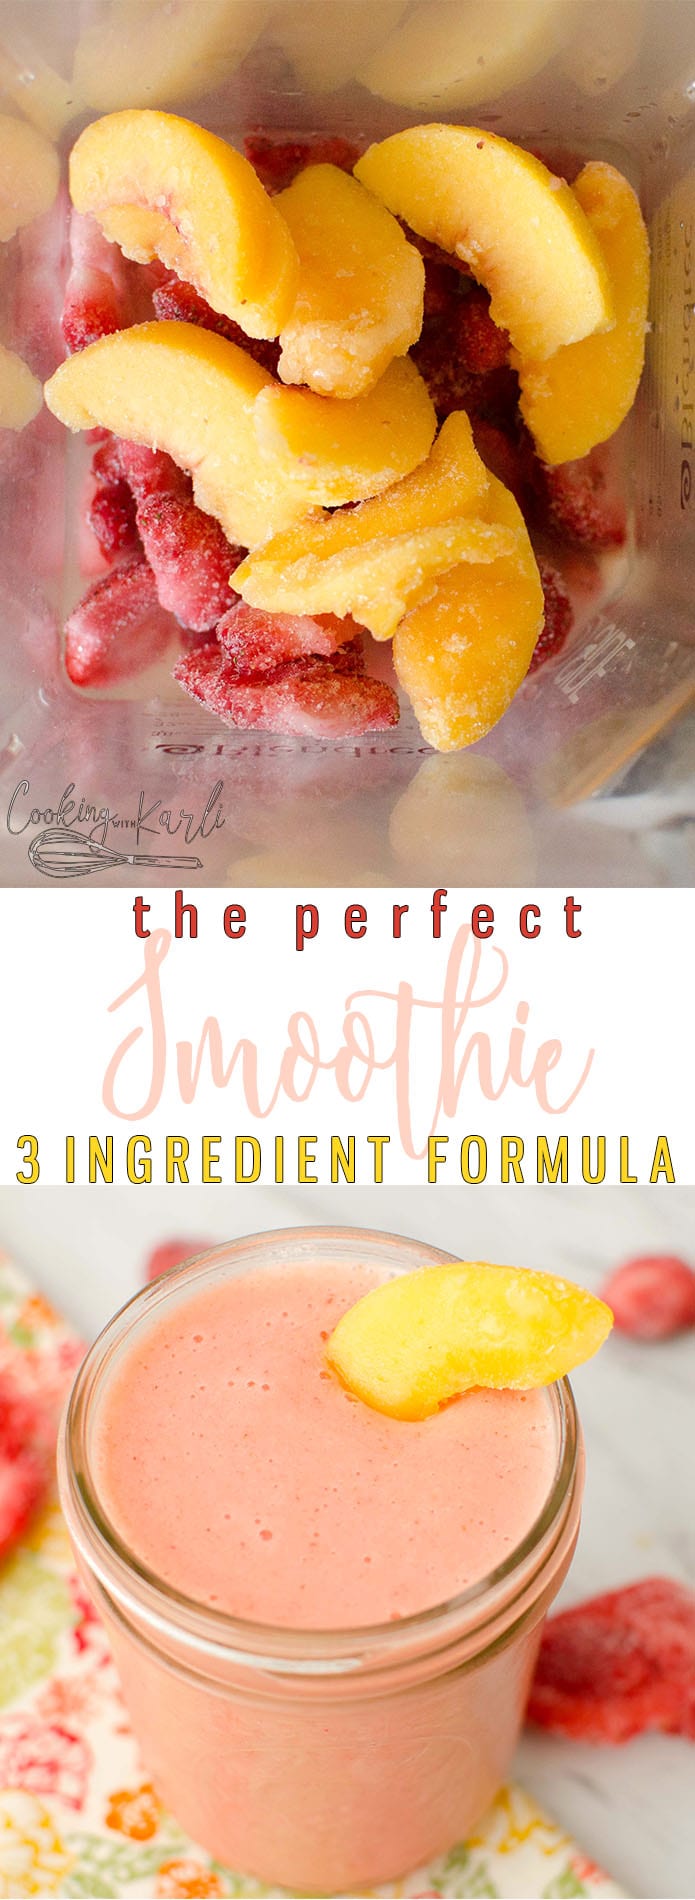 Fruit Smoothies are the perfect way to cool off in the summer! This recipe, or formula, is easy to adapt so you can create your own flavors! |Cooking with Karli| #smoothie #fruit #frozenfruit #recipe #strawberry #peach #jamba # summer #healthy